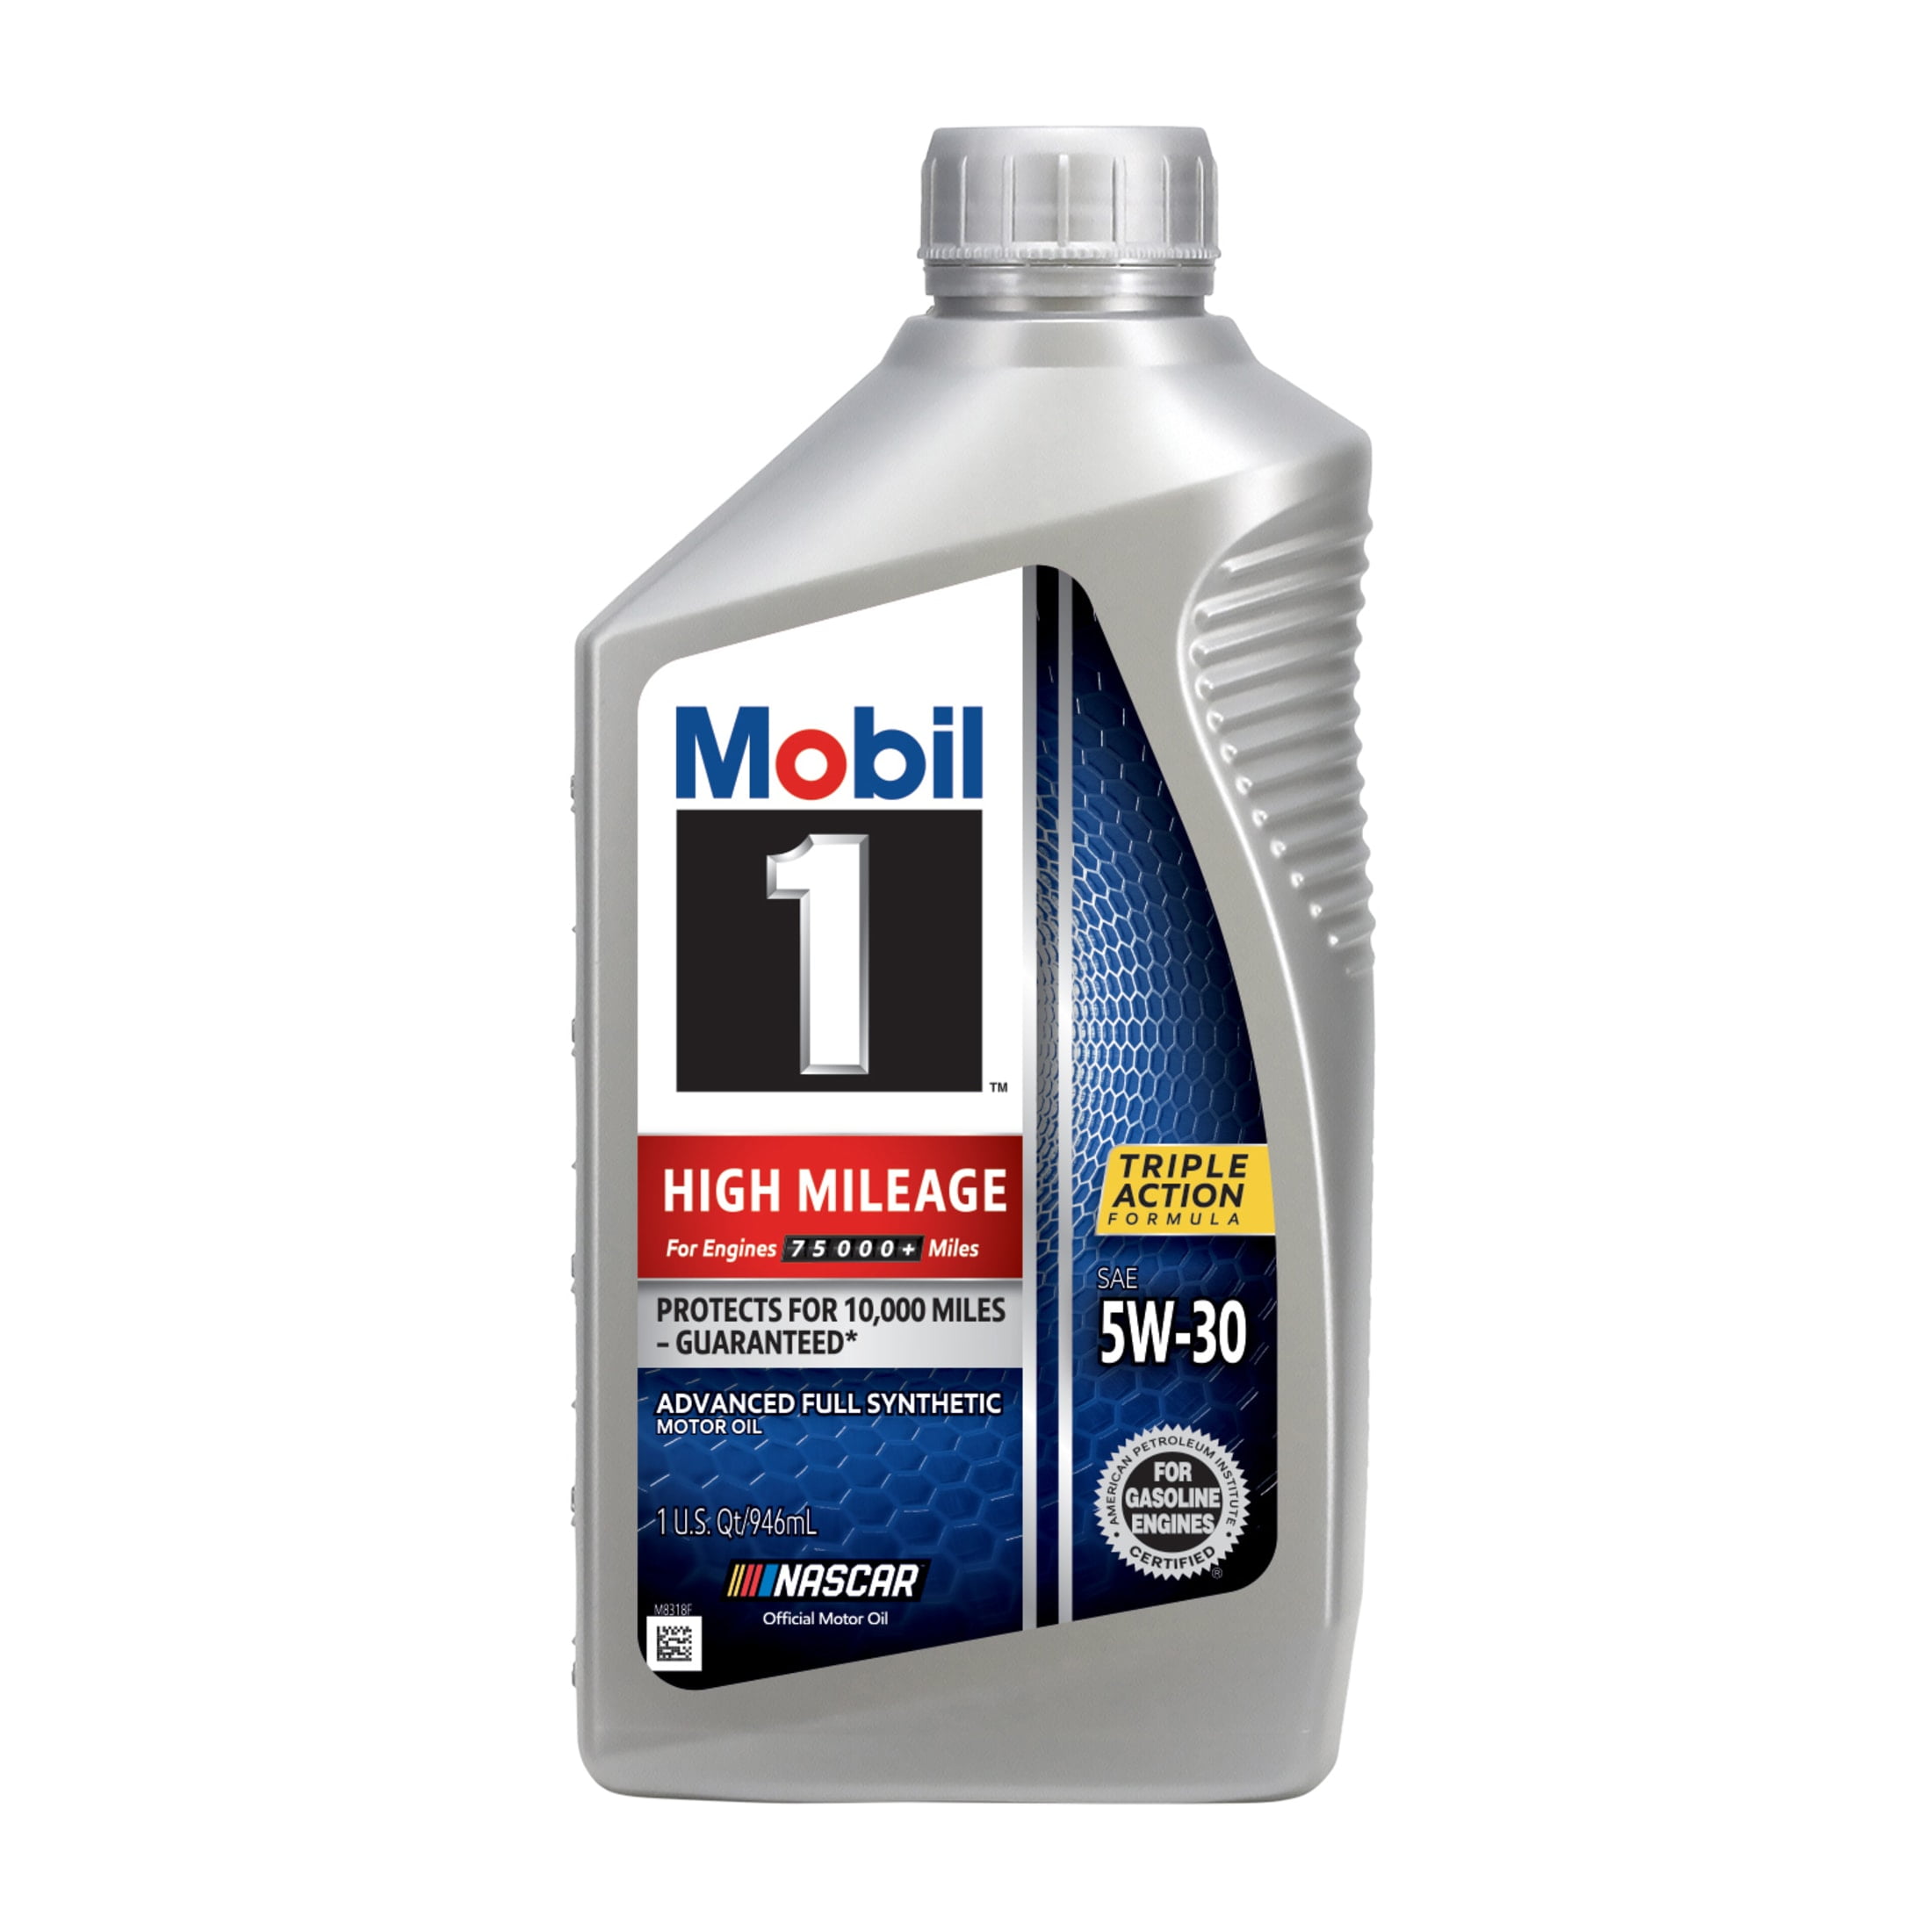 Mobil Motor Oil, Advanced Full Synthetic, 5W-30, High Mileage - 1 qt